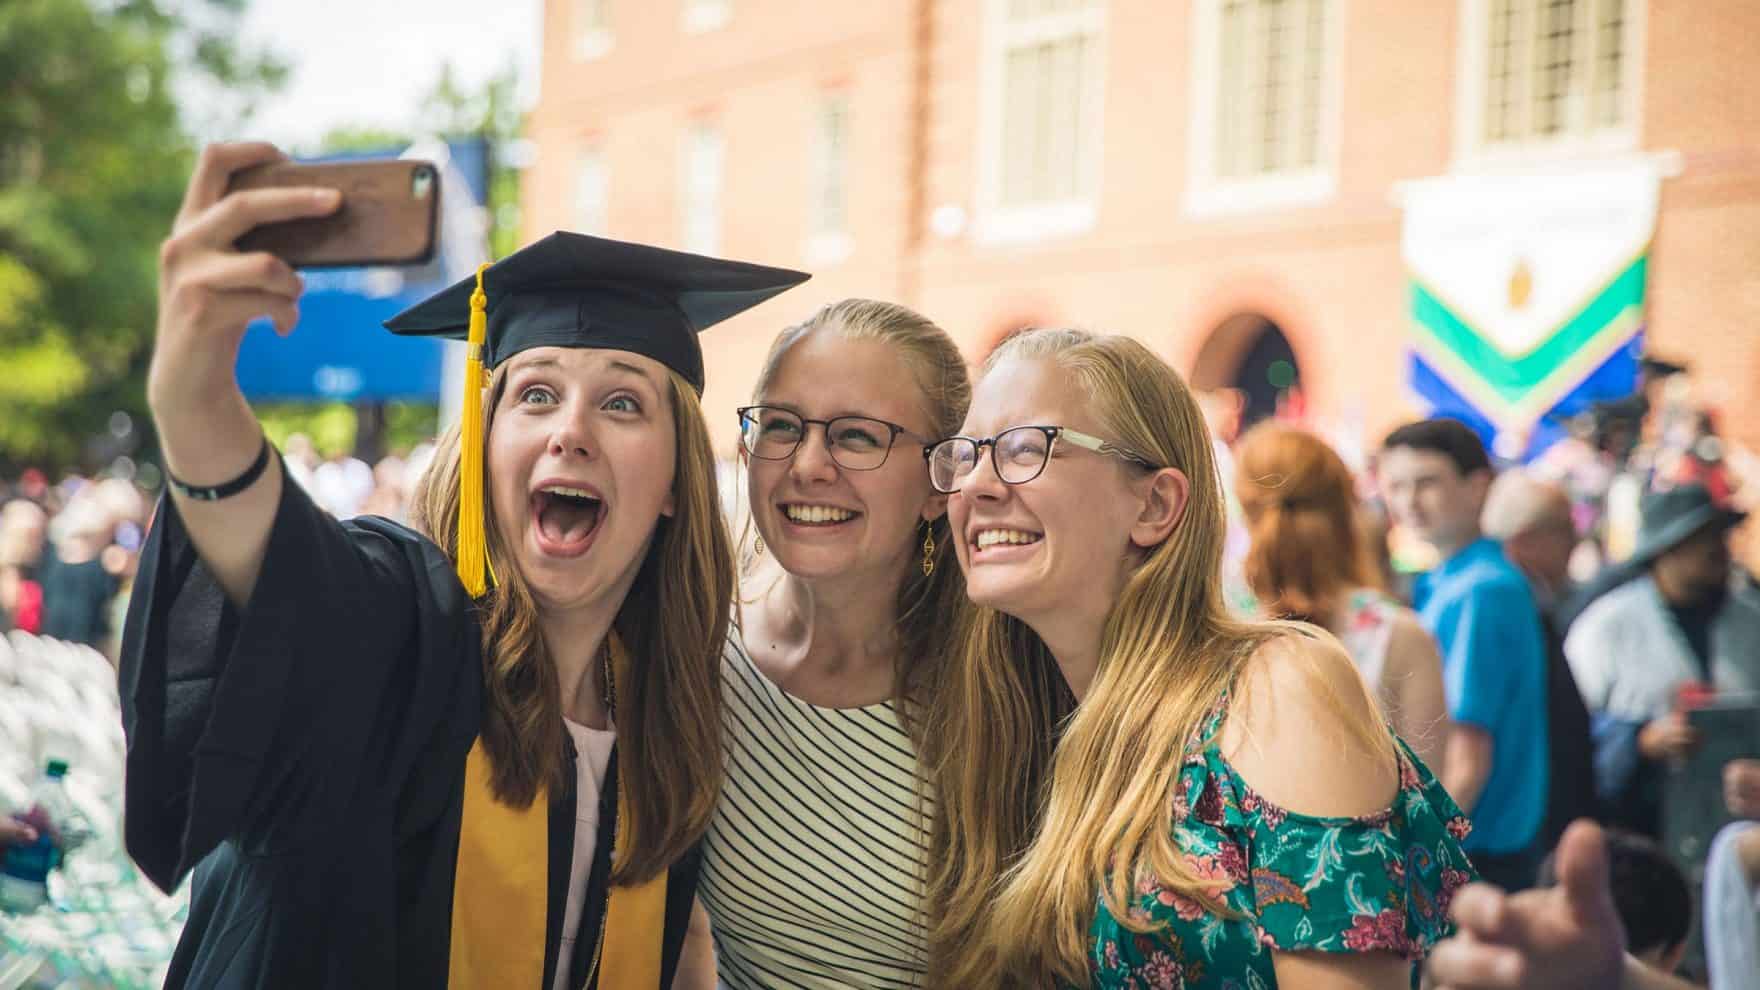 A Regent University graduate takes a selfie with two friends on commencement day in front of the Regent University Library in Virginia Beach.